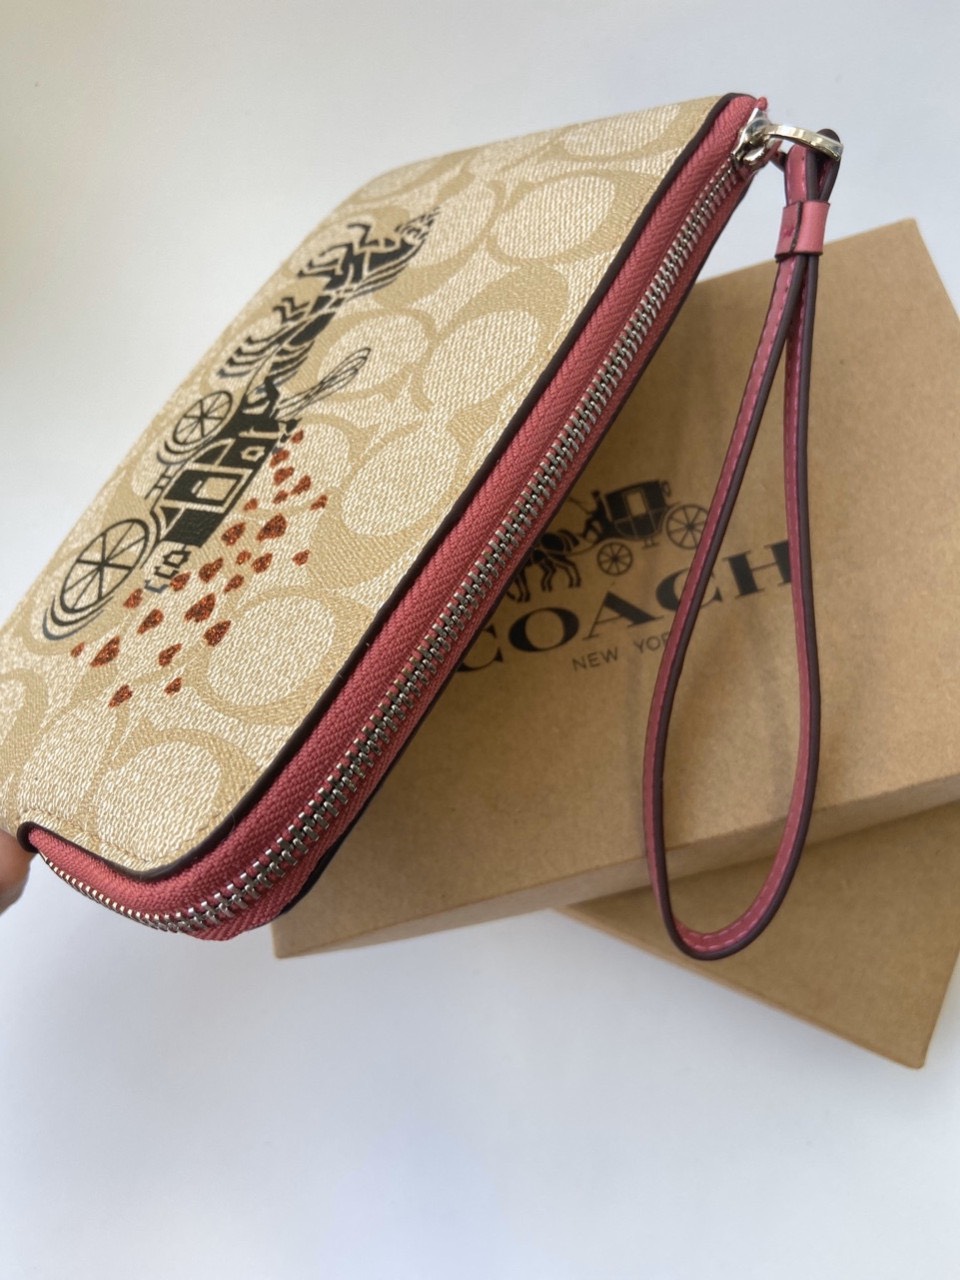 VÍ COACH MỎNG HỌA TIẾT XE NGỰA | CLUTCH COACH CORNER ZIP WRISTLET IN SIGNATURE CANVAS WITH HORSE AND CARRIAGE HEARTS 2